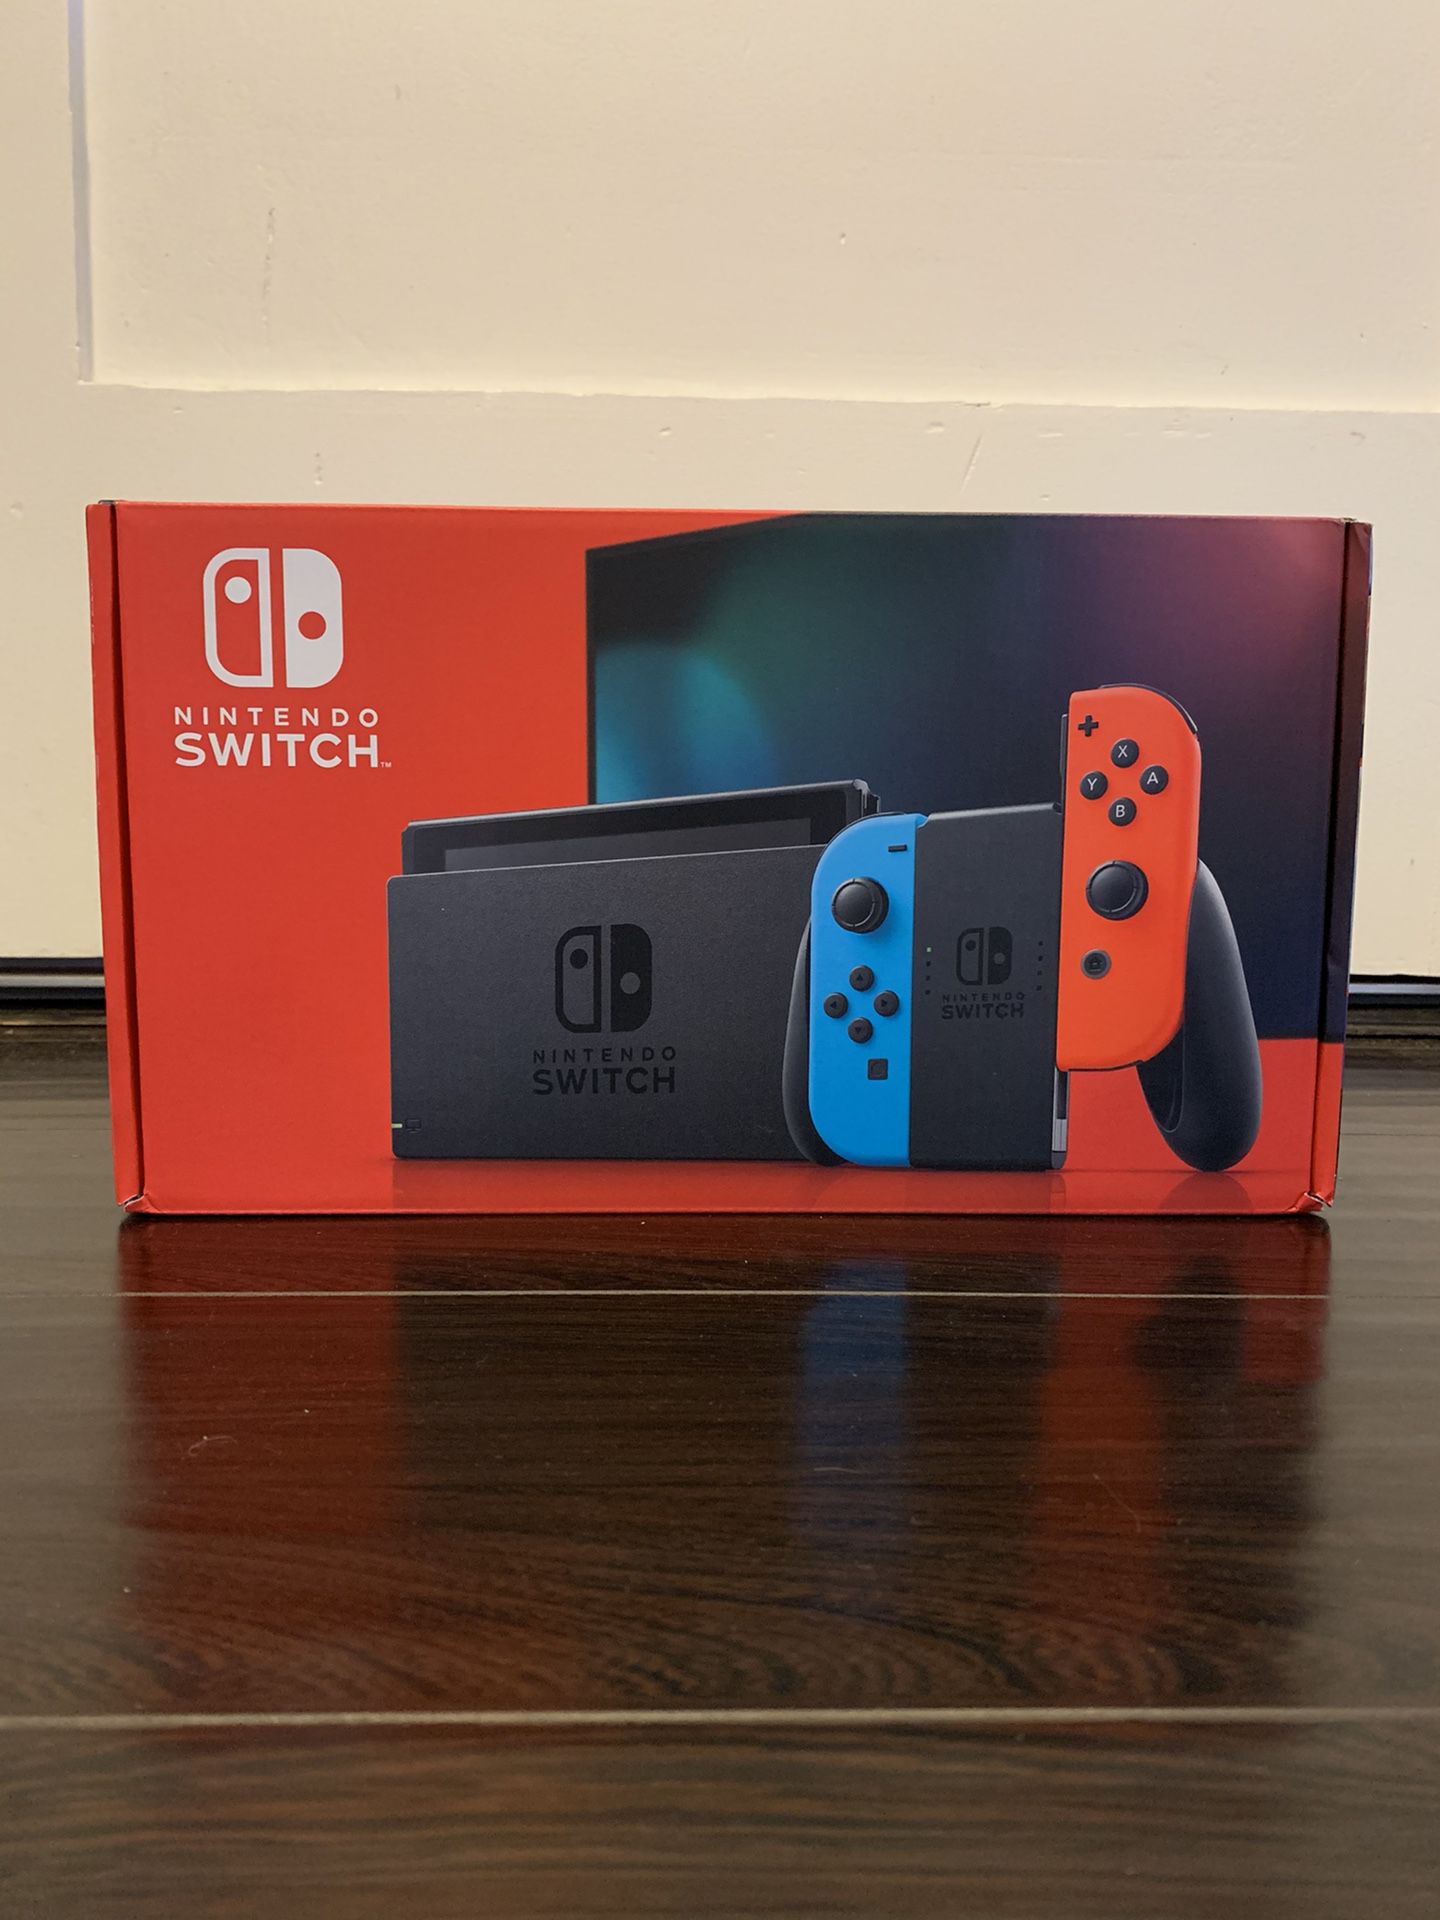 Nintendo Switch 32GB Console with Neon Blue and Neon Red Joy-Con